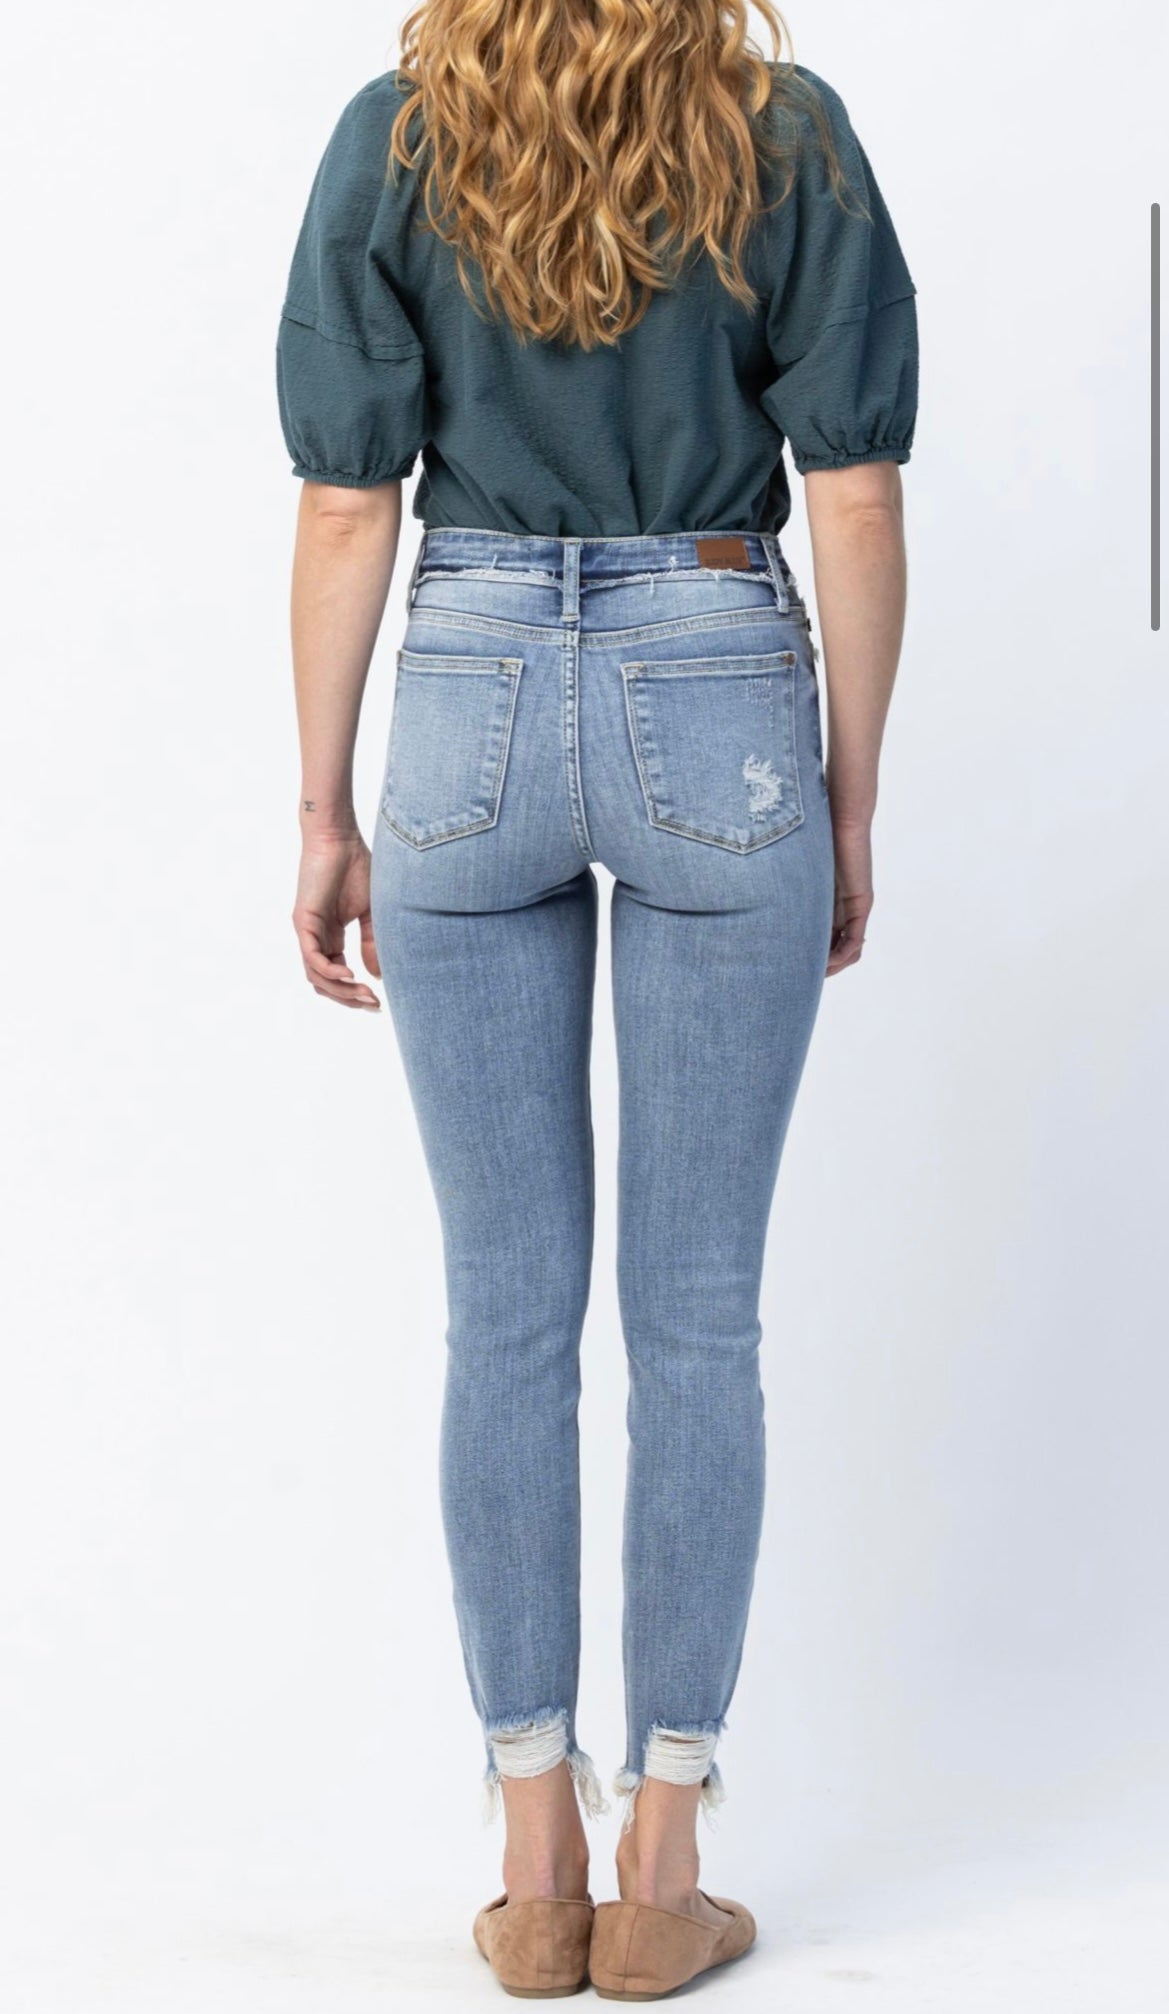 Judy Blue - Mid-Rise Release Waistband Skinny